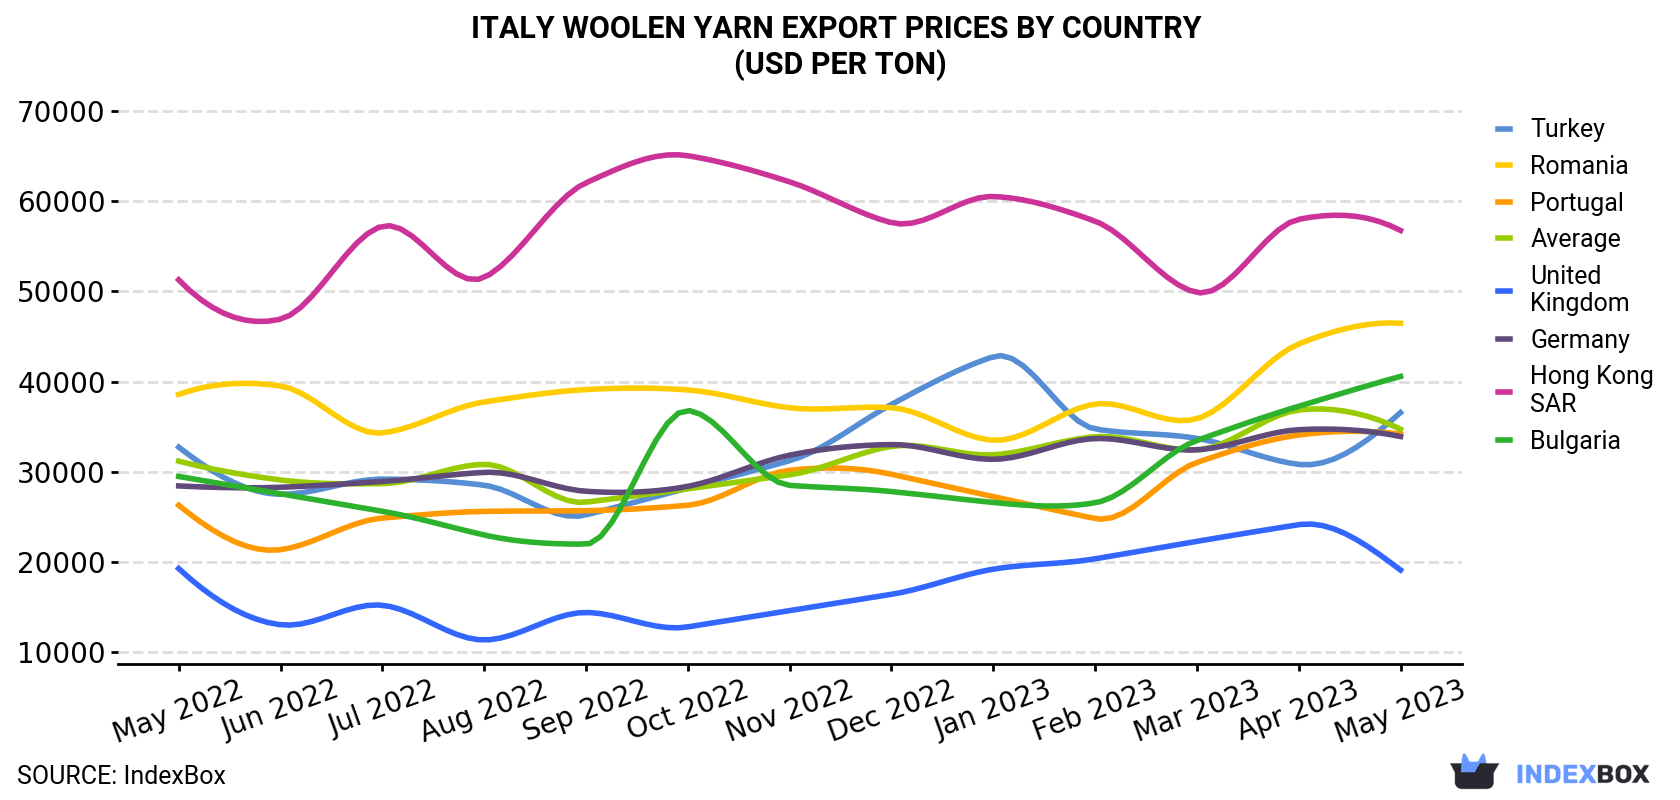 Italy Woolen Yarn Export Prices By Country (USD Per Ton)